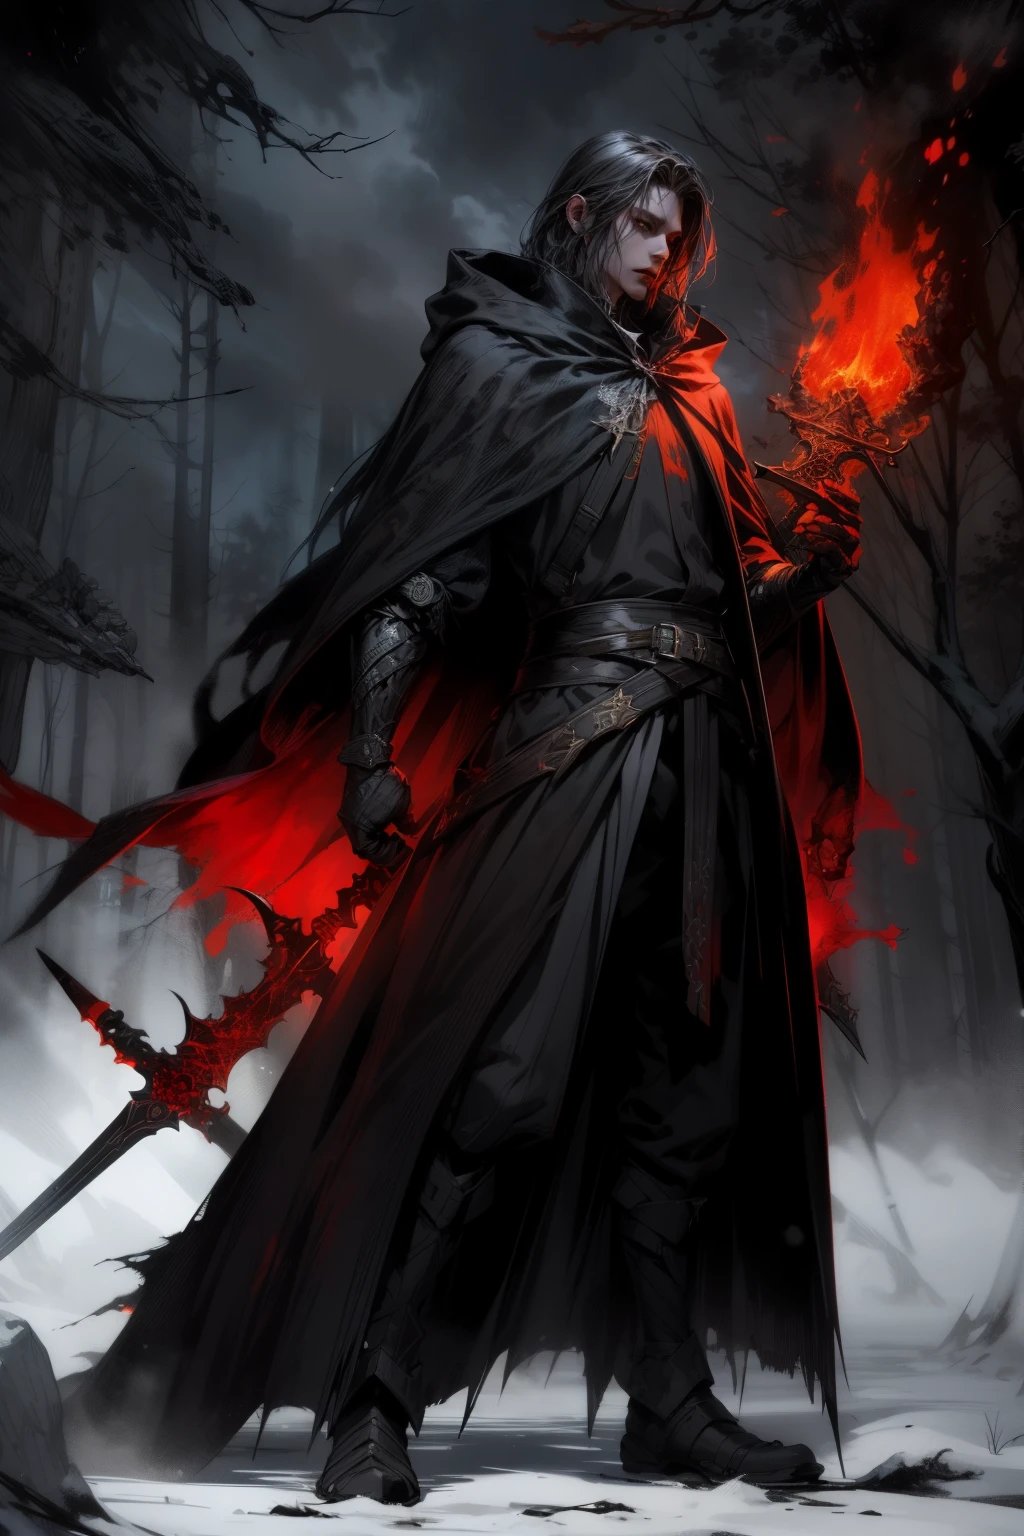 a man in a cloak holding a sword in a dark black and 赤 forest, 森の中で剣を握る, 光る剣 (赤),ダークファンタジースタイル art, ダークファンタジーアートwork, 8k ファンタジーアート, ダークファンタジースタイル, 4Kファンタジーアート, 壮大なファンタジーアートスタイルHD, ダークファンタジーアート, ダークファンタジーコンセプトアート, デジタルアートスタイルの壮大なファンタジー, in style of ダークファンタジーアート, 光る剣 in hand, 燃える森, 炎, キャンプファイヤー